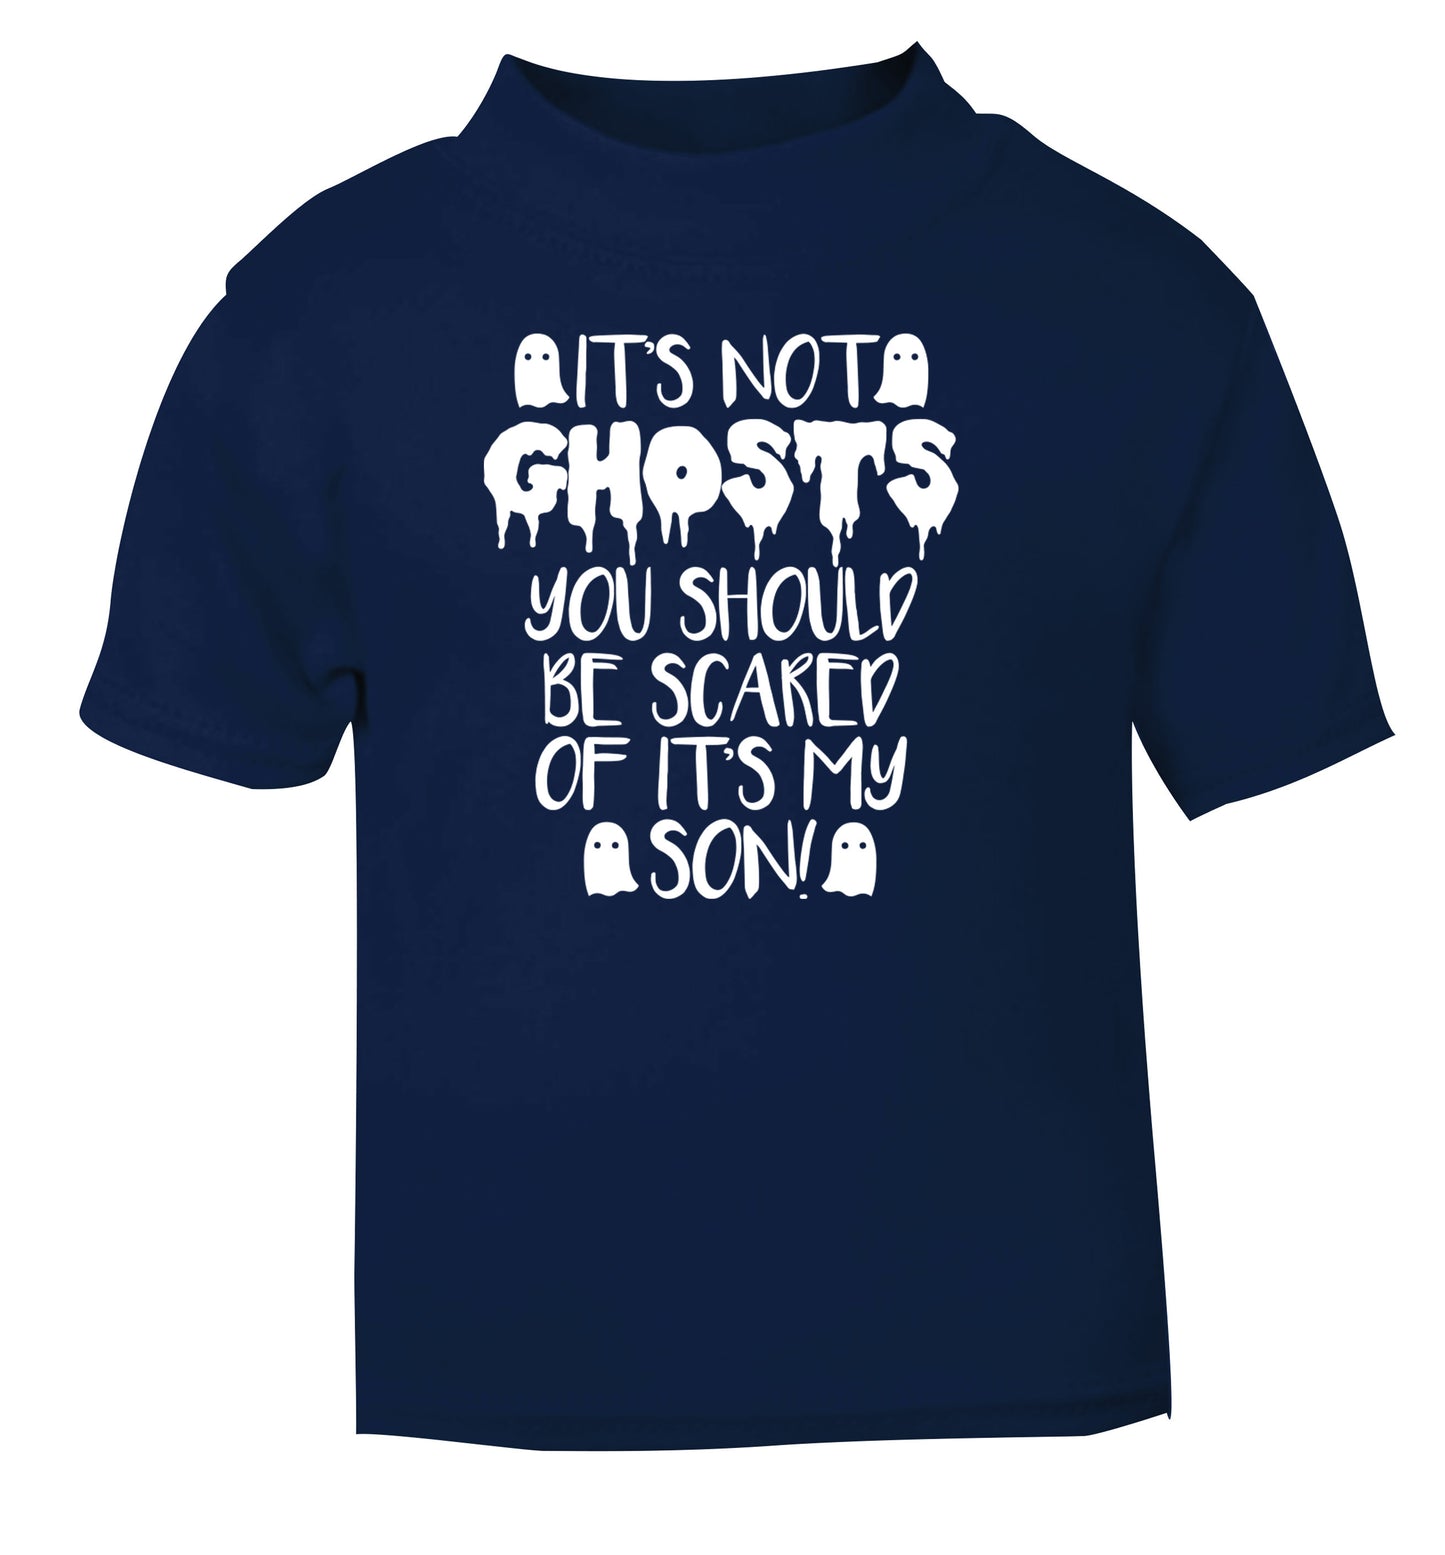 It's not ghosts you should be scared of it's my son! navy Baby Toddler Tshirt 2 Years